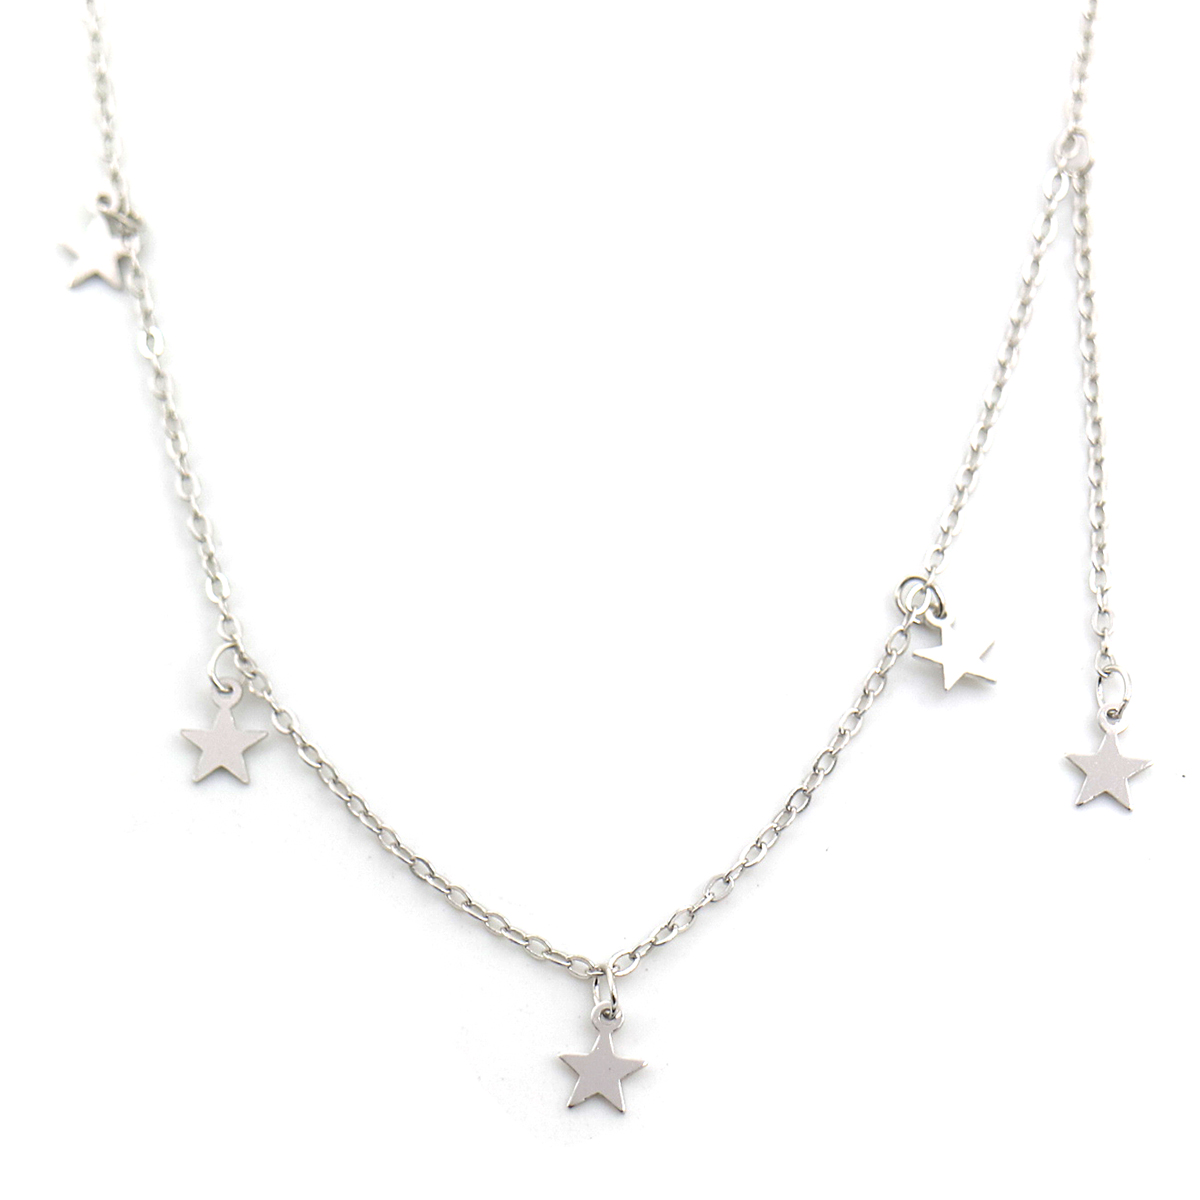 B-D17.5 SN104-368 925S Silver Necklace Stars